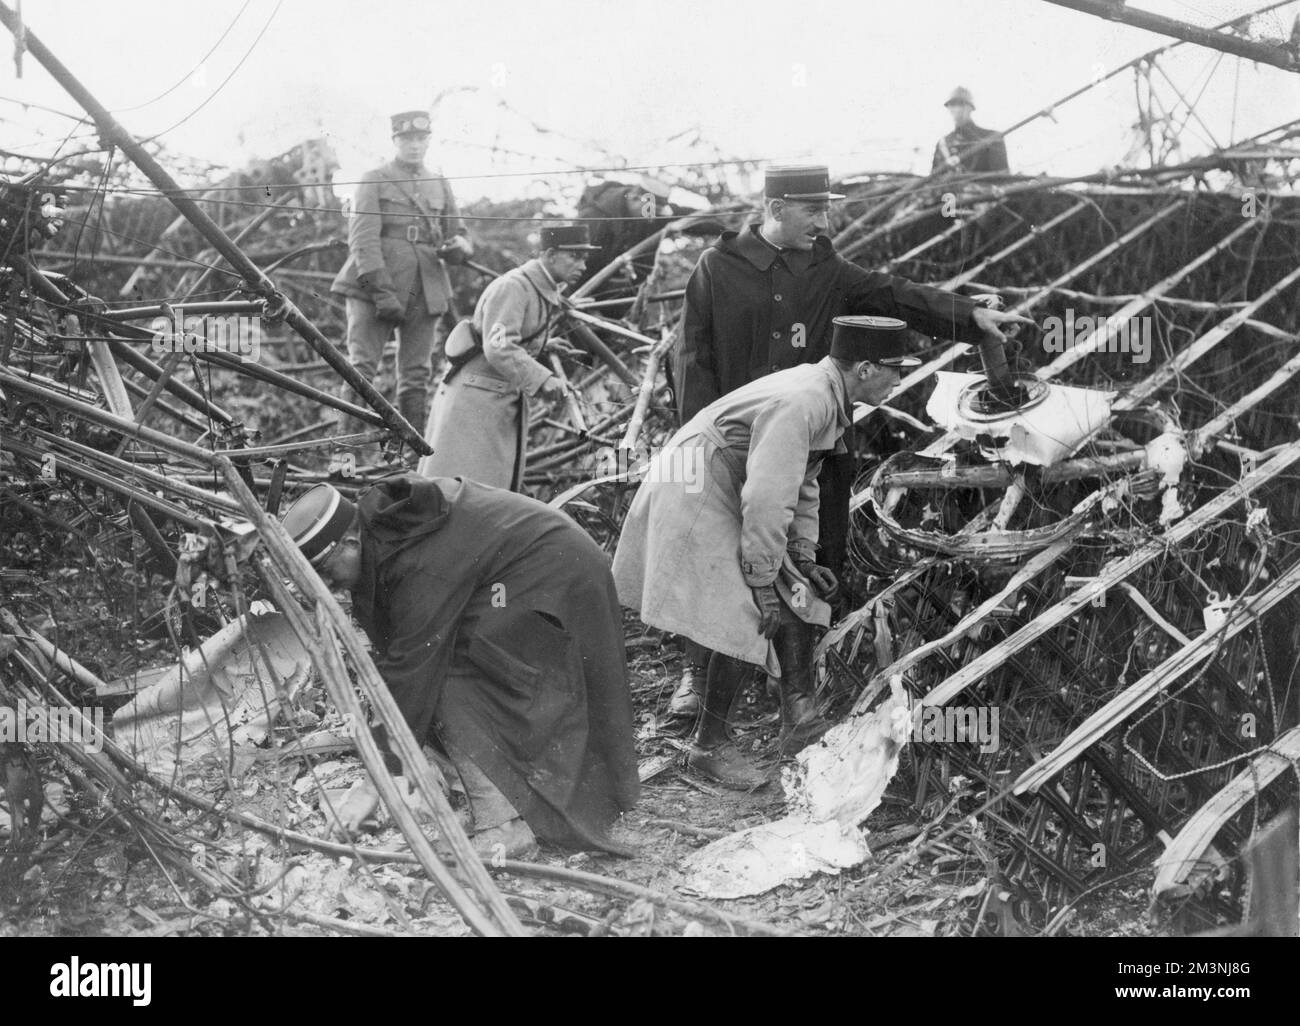 French police search through the wreckage of the British R101 airship that crashed near Beauvais in France on its maiden voyage to Egypt and India on 5th October 1930, with the eventual loss of 48 out of the 54 passengers, officials, officers and crew on board.     Date: October 1930 Stock Photo